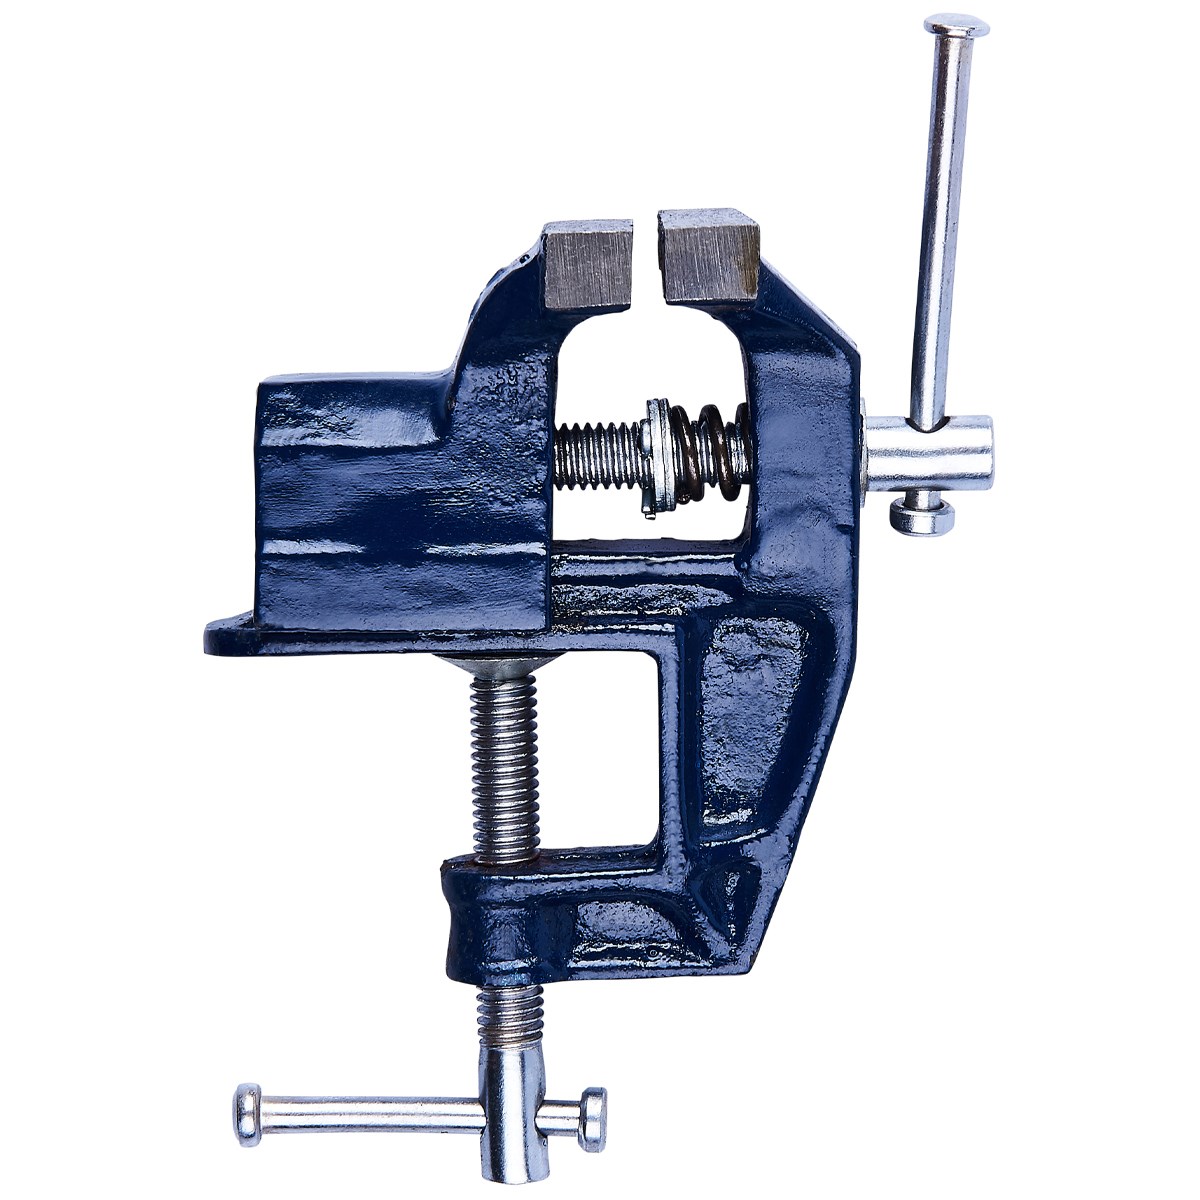 Amtech ® 50mm mini clamp on swivel base baby bench vice for table workbench...